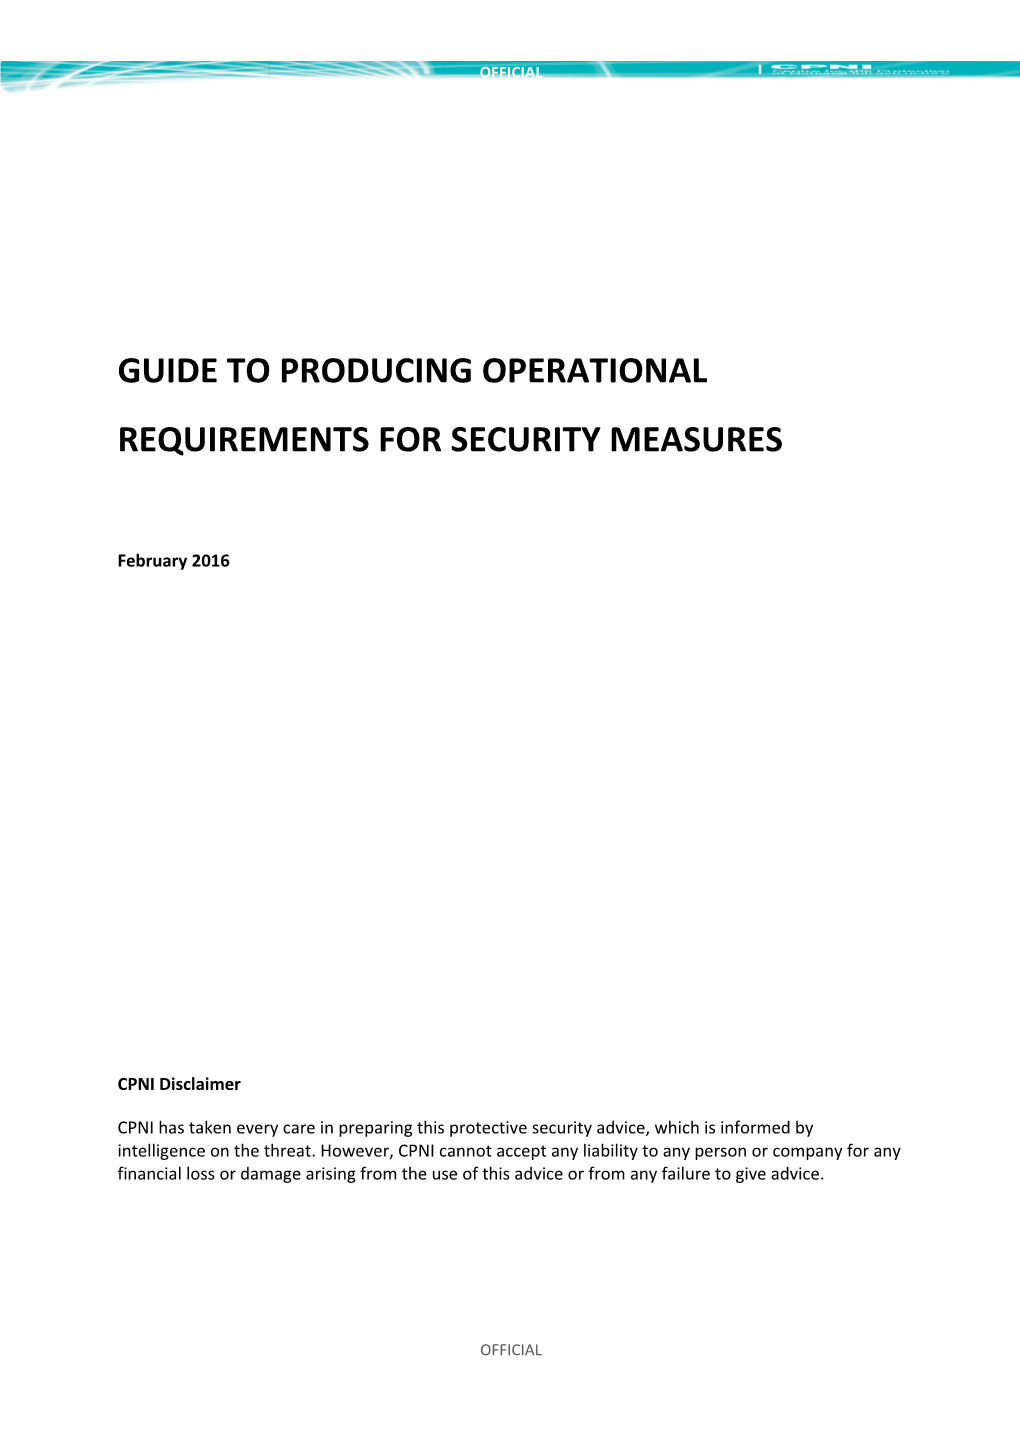 Guide to Producing Operational Requirements for Security Measures